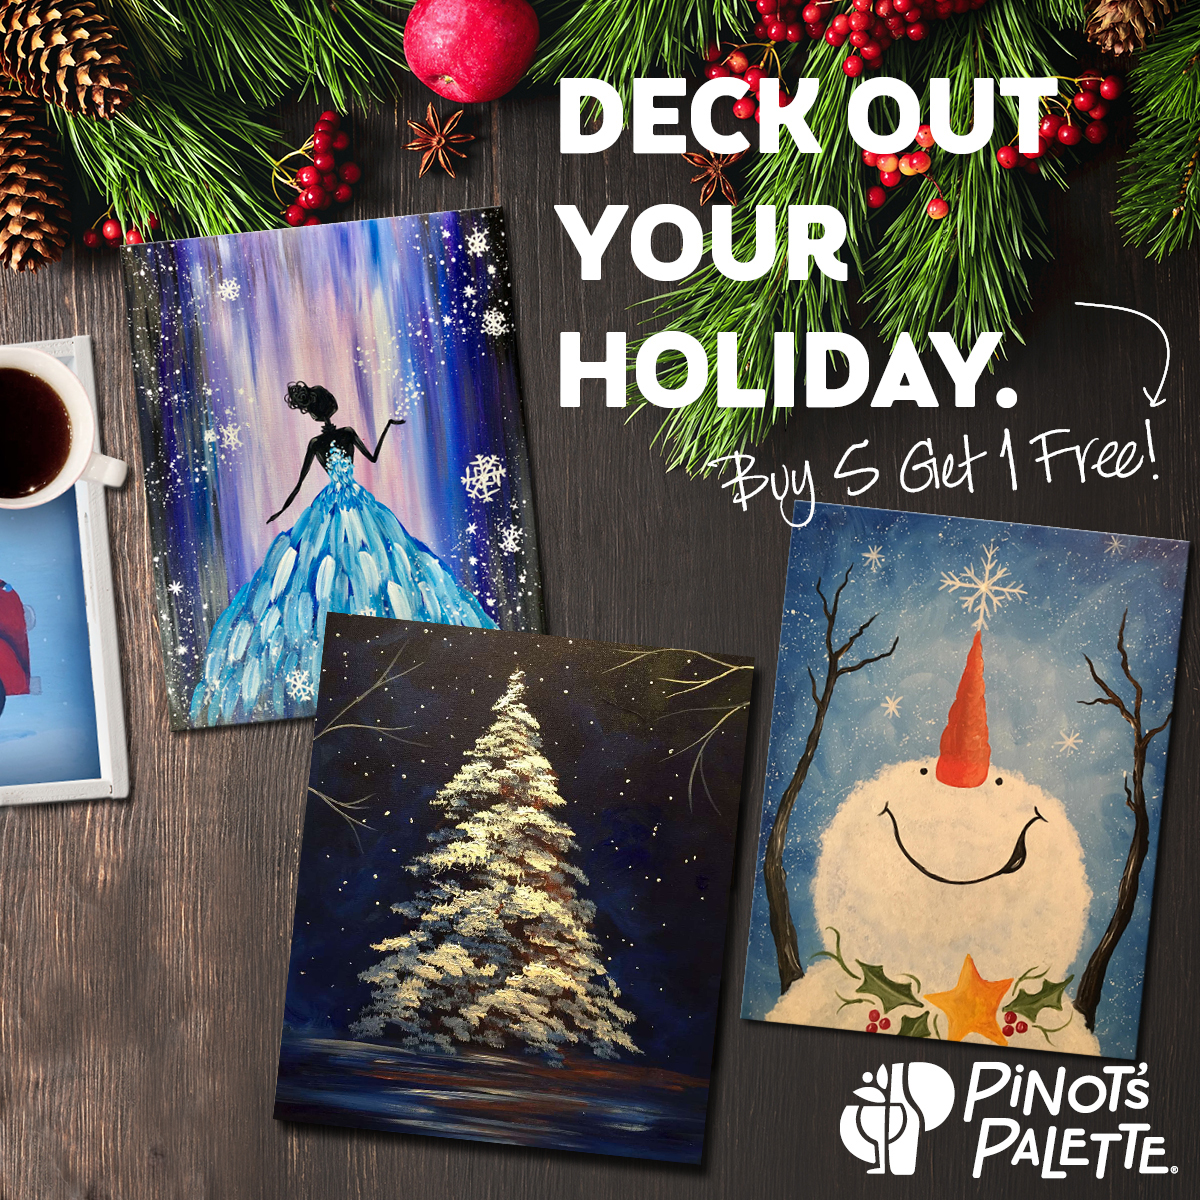 Deck Out Your Holiday!